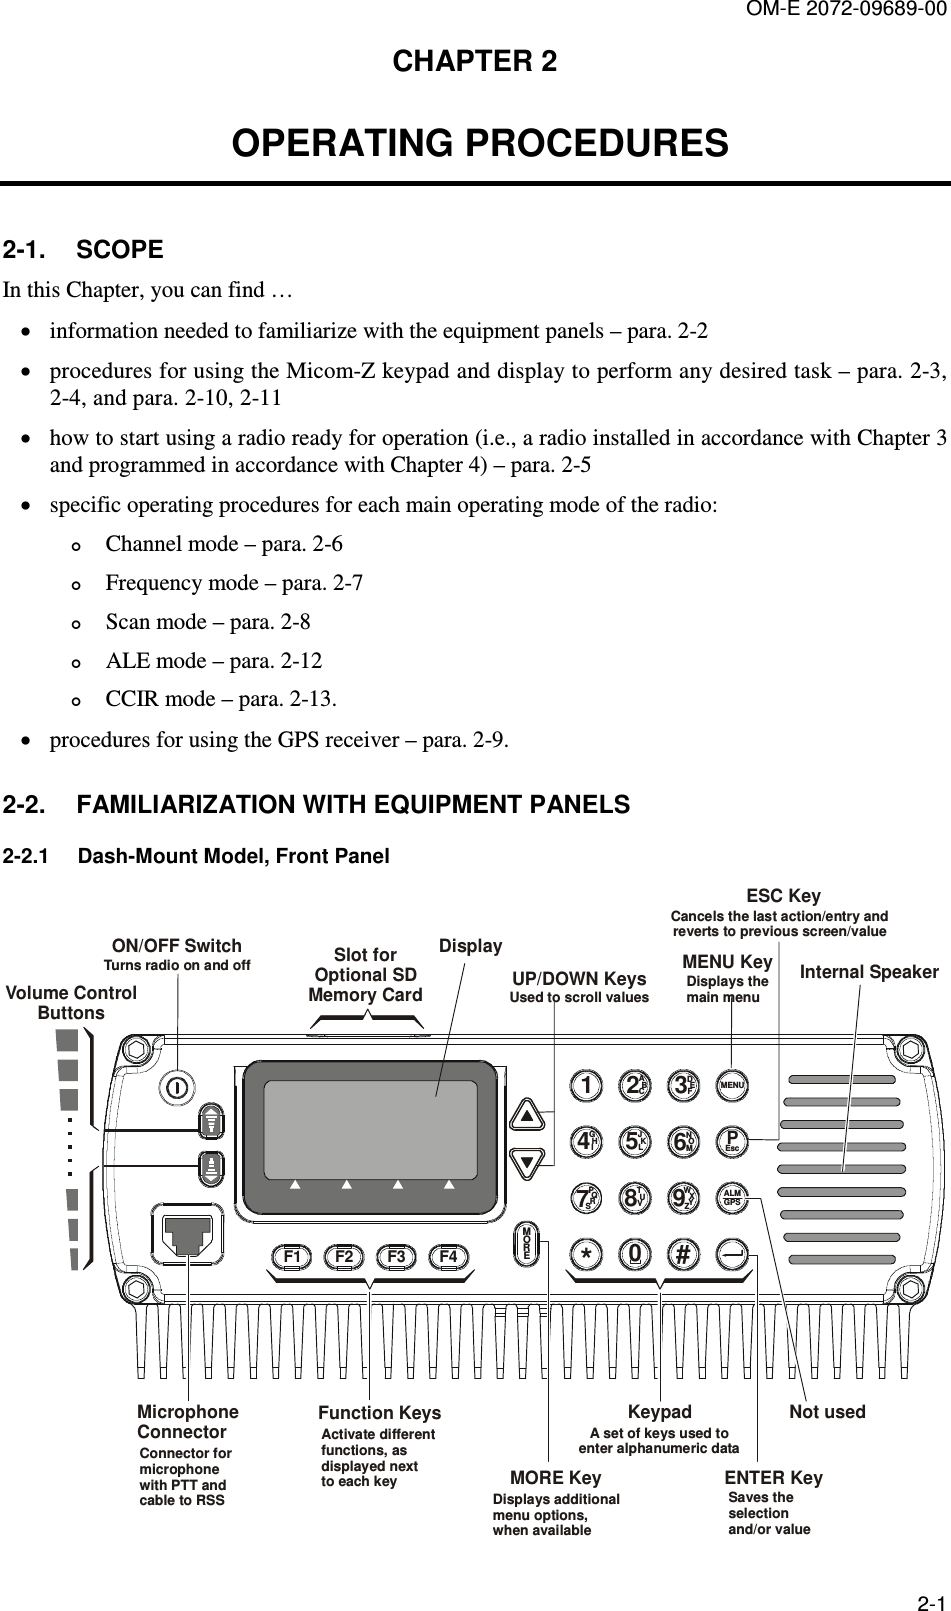 OM-E 2072-09689-00 2-1 CHAPTER 2   OPERATING PROCEDURES 2-1.  SCOPE In this Chapter, you can find … • information needed to familiarize with the equipment panels – para.  2-2 • procedures for using the Micom-Z keypad and display to perform any desired task – para.  2-3,  2-4, and para.  2-10,  2-11 • how to start using a radio ready for operation (i.e., a radio installed in accordance with Chapter 3 and programmed in accordance with Chapter 4) – para.  2-5 • specific operating procedures for each main operating mode of the radio:  Channel mode – para.  2-6  Frequency mode – para.  2-7  Scan mode – para.  2-8  ALE mode – para.  2-12  CCIR mode – para.  2-13. • procedures for using the GPS receiver – para.  2-9. 2-2.  FAMILIARIZATION WITH EQUIPMENT PANELS 2-2.1  Dash-Mount Model, Front Panel F4MOREF3F2F11*DMENUALMGPSEscEFABC2JKL5TUV8NOM6WXYZ930#GHI4PPQS7RSlot forOptional SD Memory CardON/OFF SwitchTurns radio on and offUP/DOWN KeysUsed to scroll valuesDisplayKeypadA set of keys used to enter alphanumeric dataSaves the selectionand/or valueENTER KeyNot usedCancels the last action/entry and reverts to previous screen/valueESC KeyDisplays the main menuMENU Key Internal SpeakerFunction KeysActivate differentfunctions, asdisplayed nextto each keyMORE KeyDisplays additionalmenu options, when availableMicrophone ConnectorConnector formicrophone with PTT andcable to RSSVolume Control Buttons  